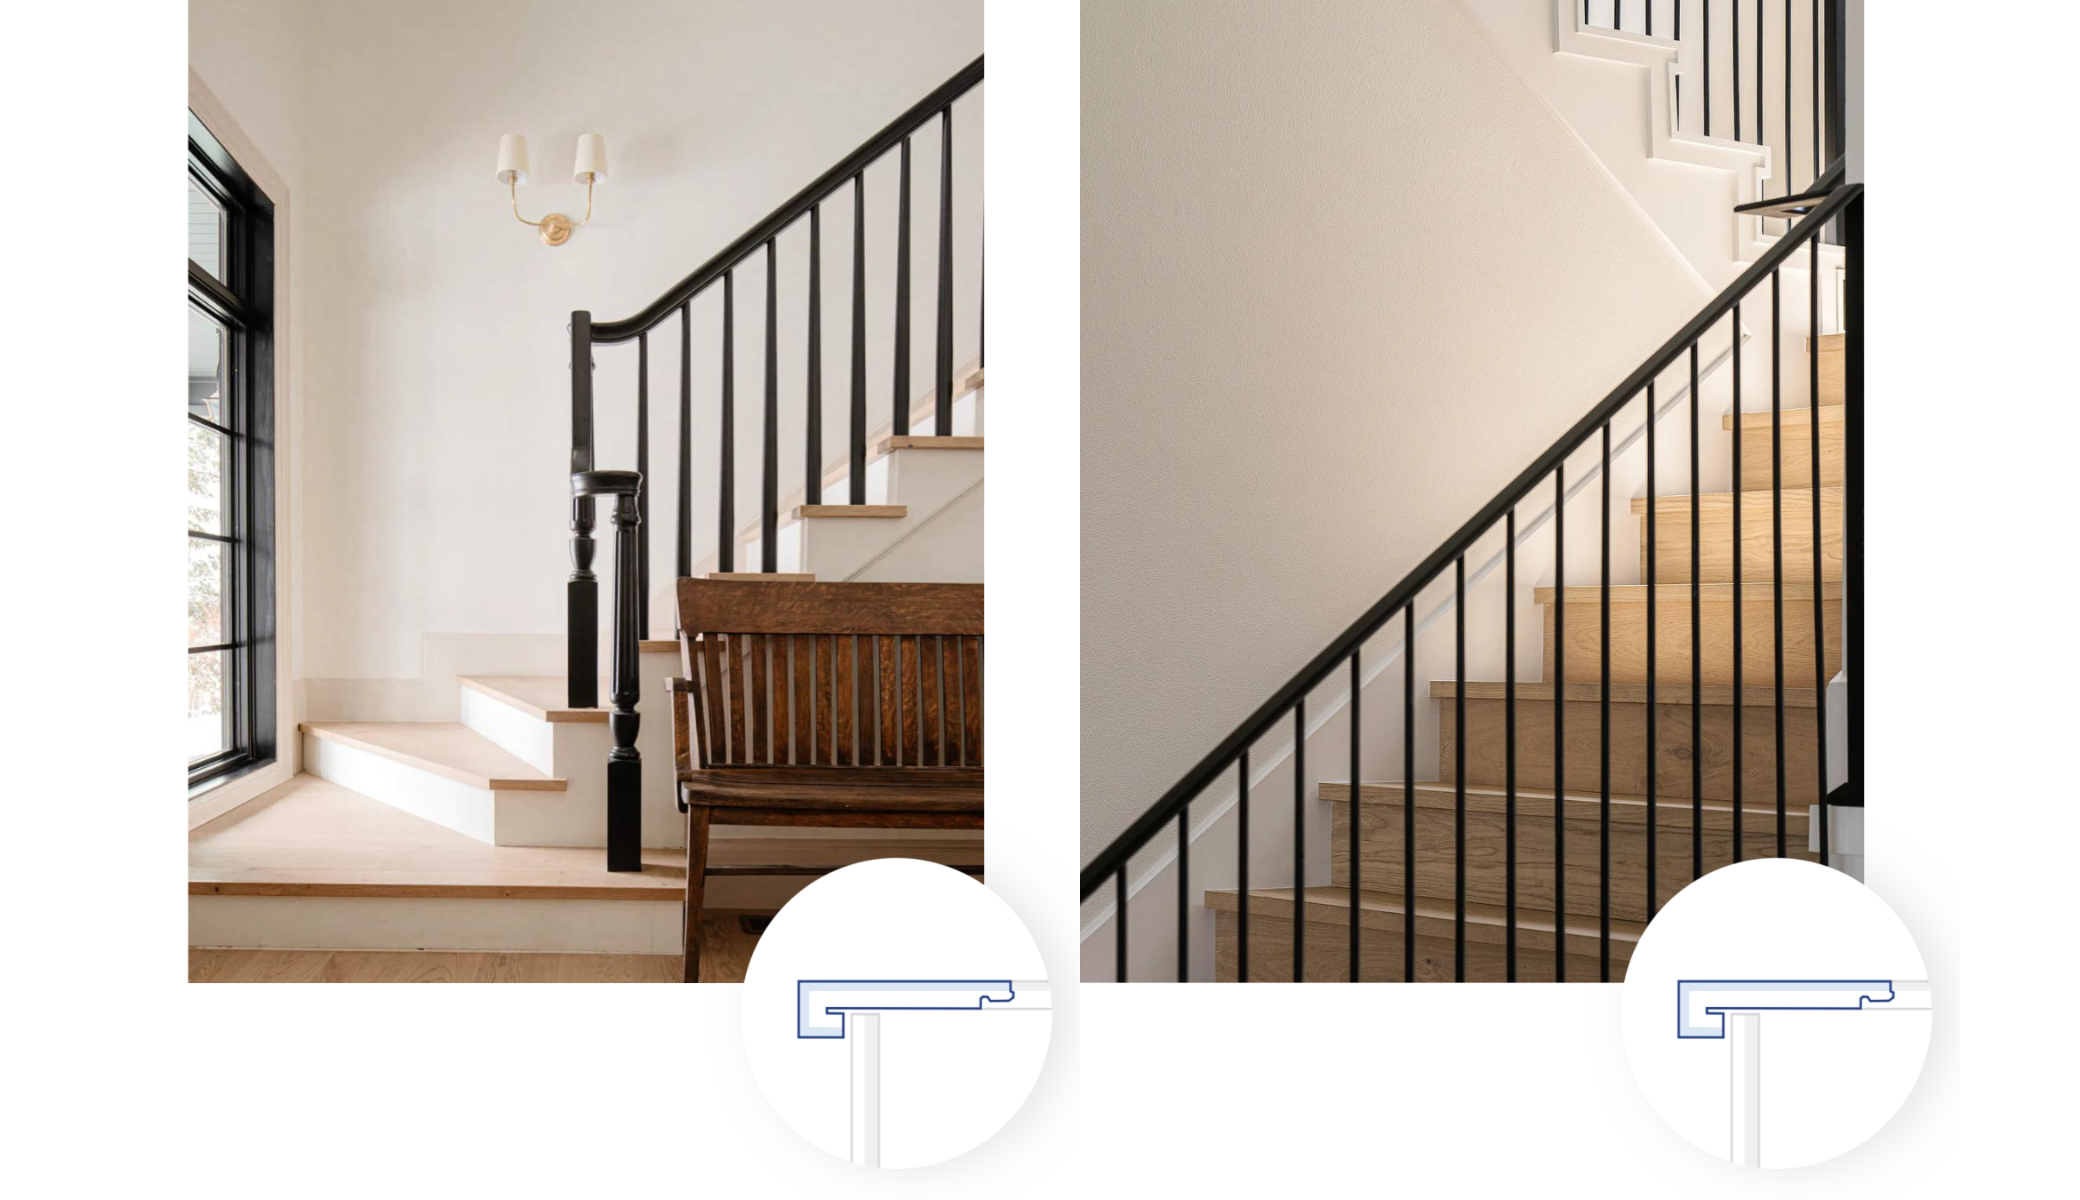 Two images showing squared stair nosings with white risers and wood risers